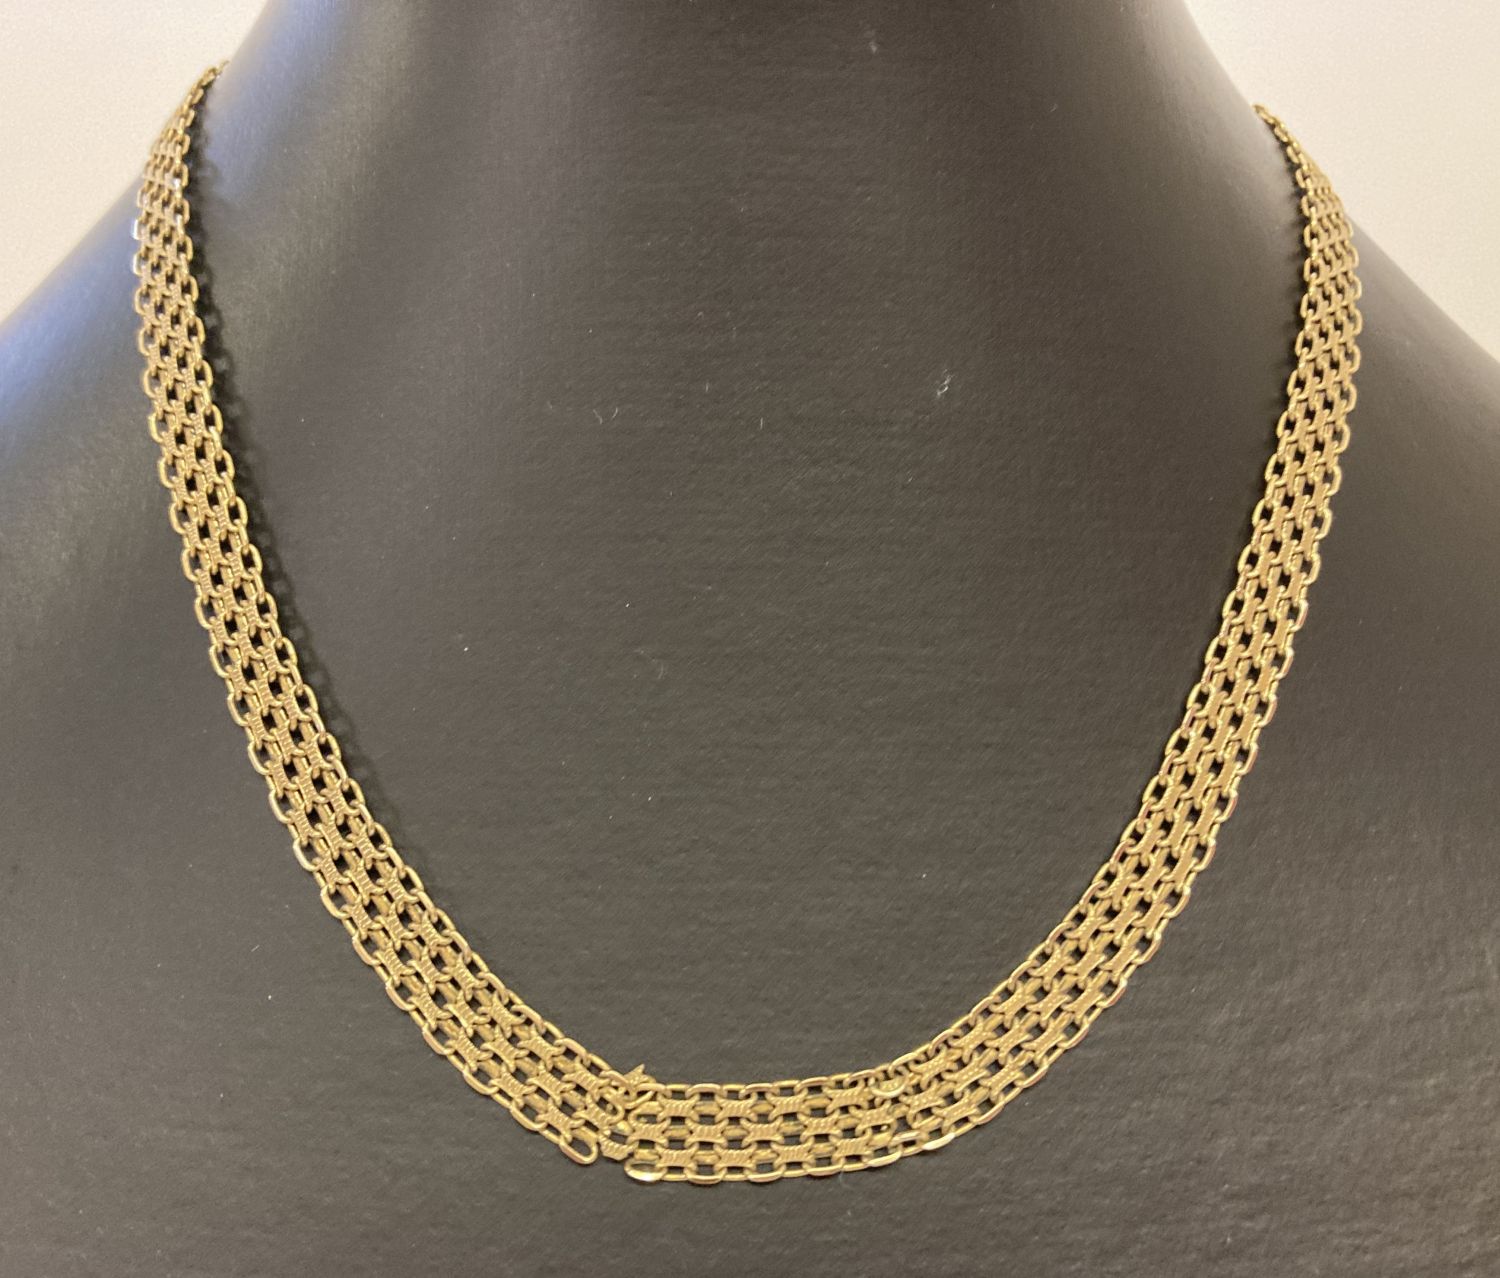 A 9ct gold vintage style decorative flat chain necklace with lobster clasp.